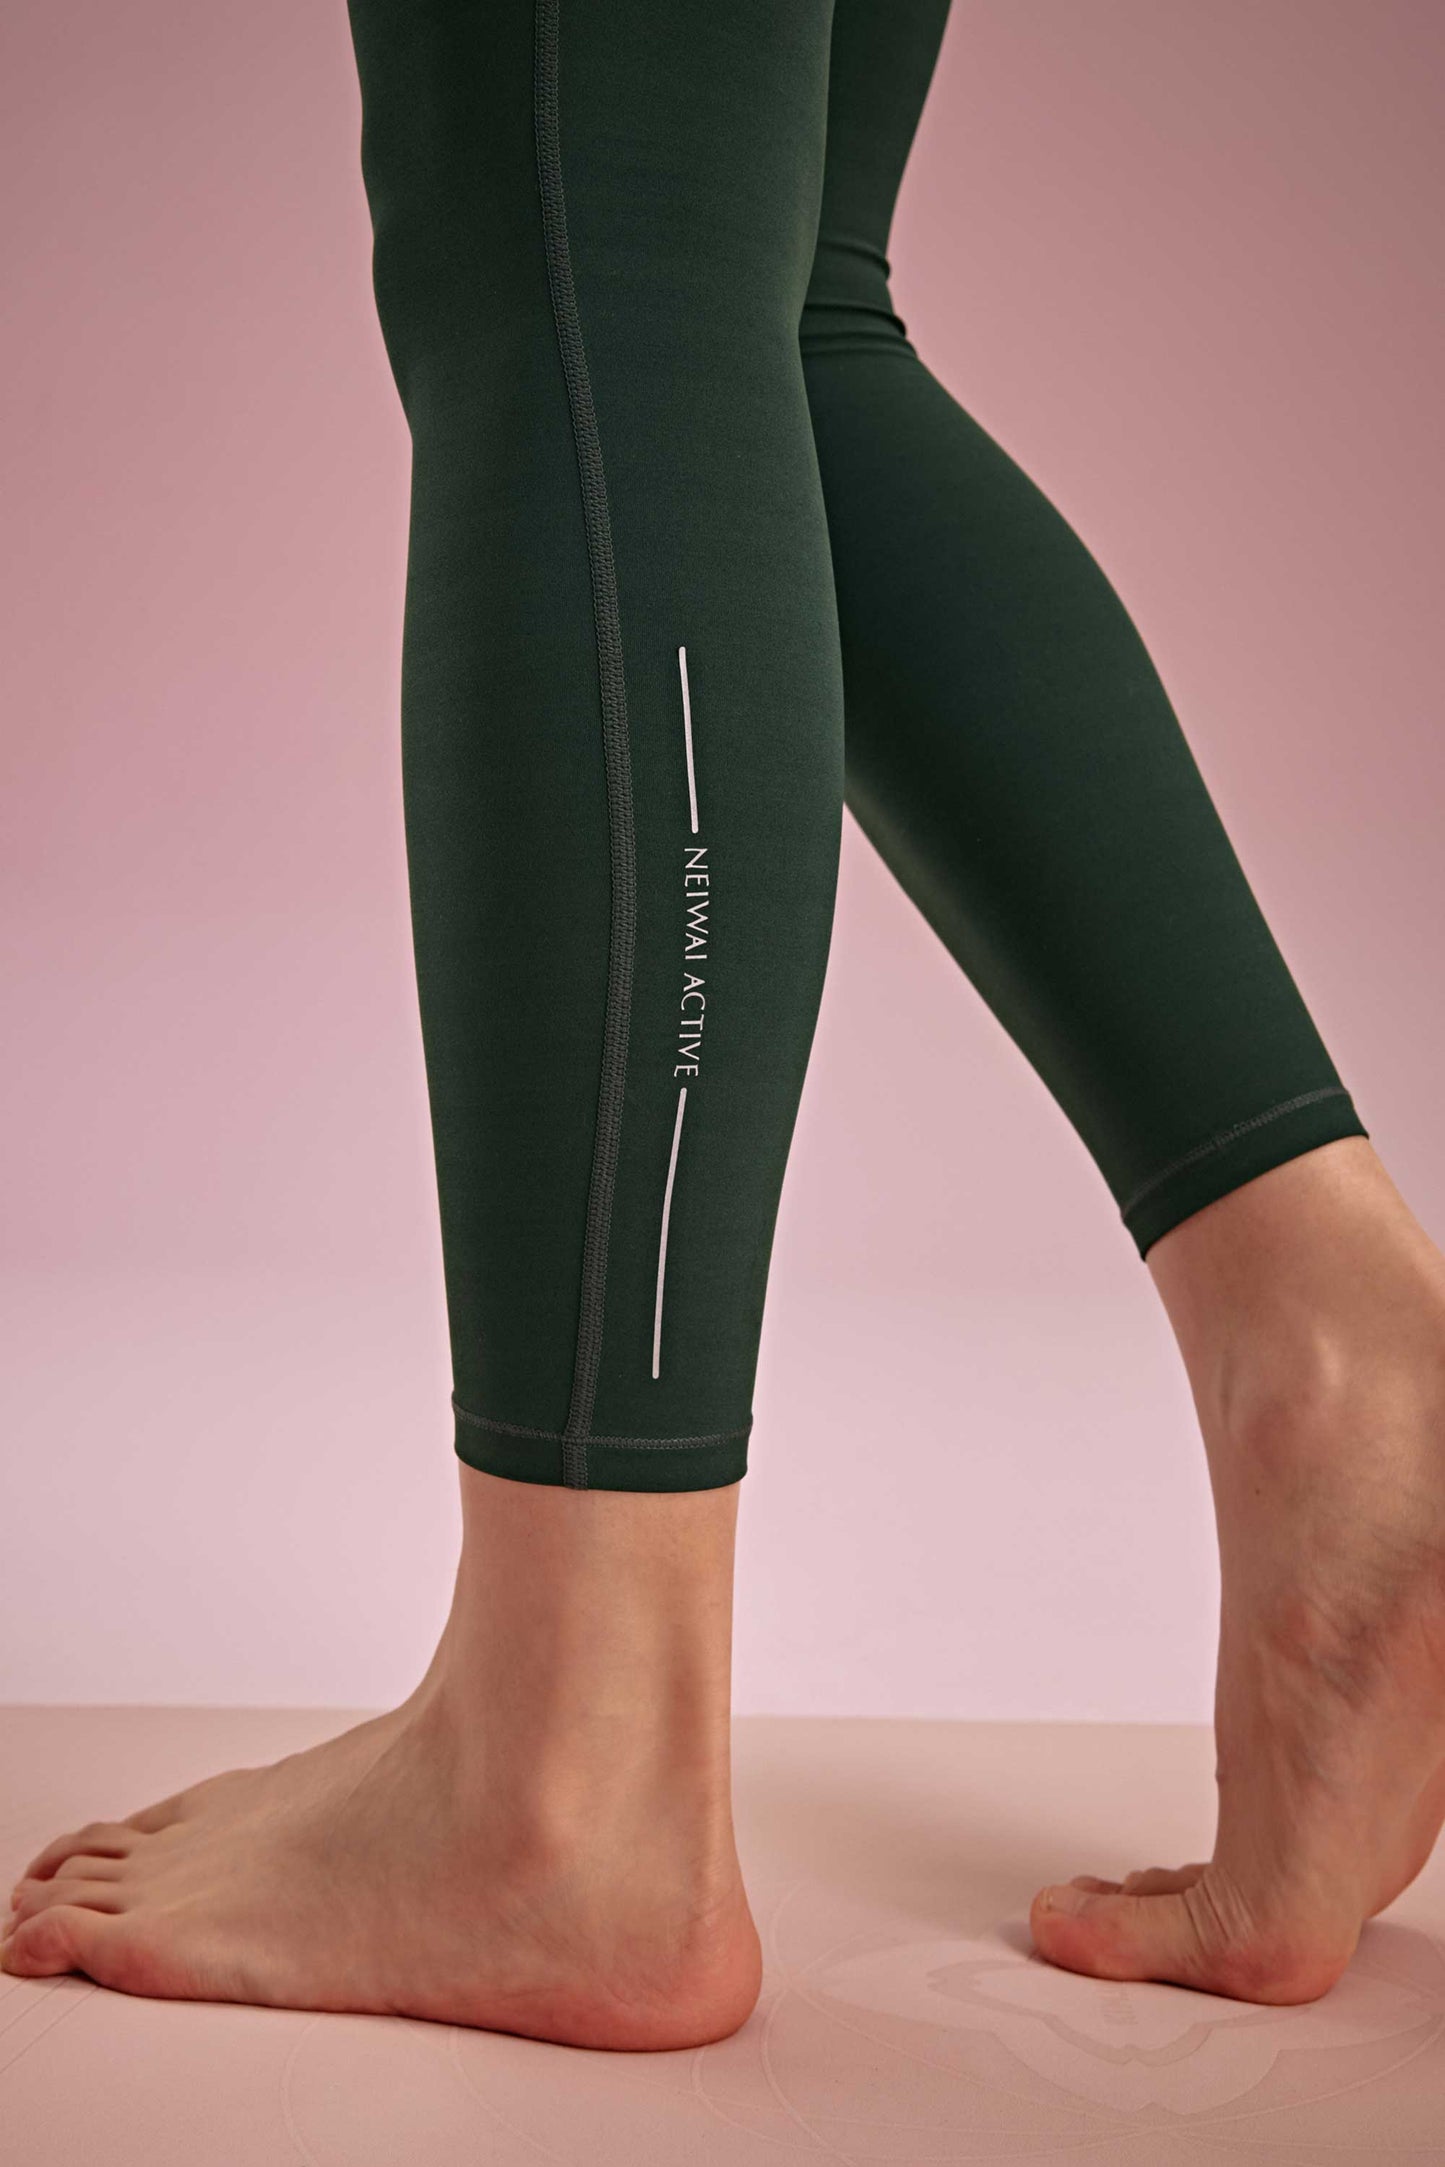 ankle detail of the green leggings shown neiwai active logo